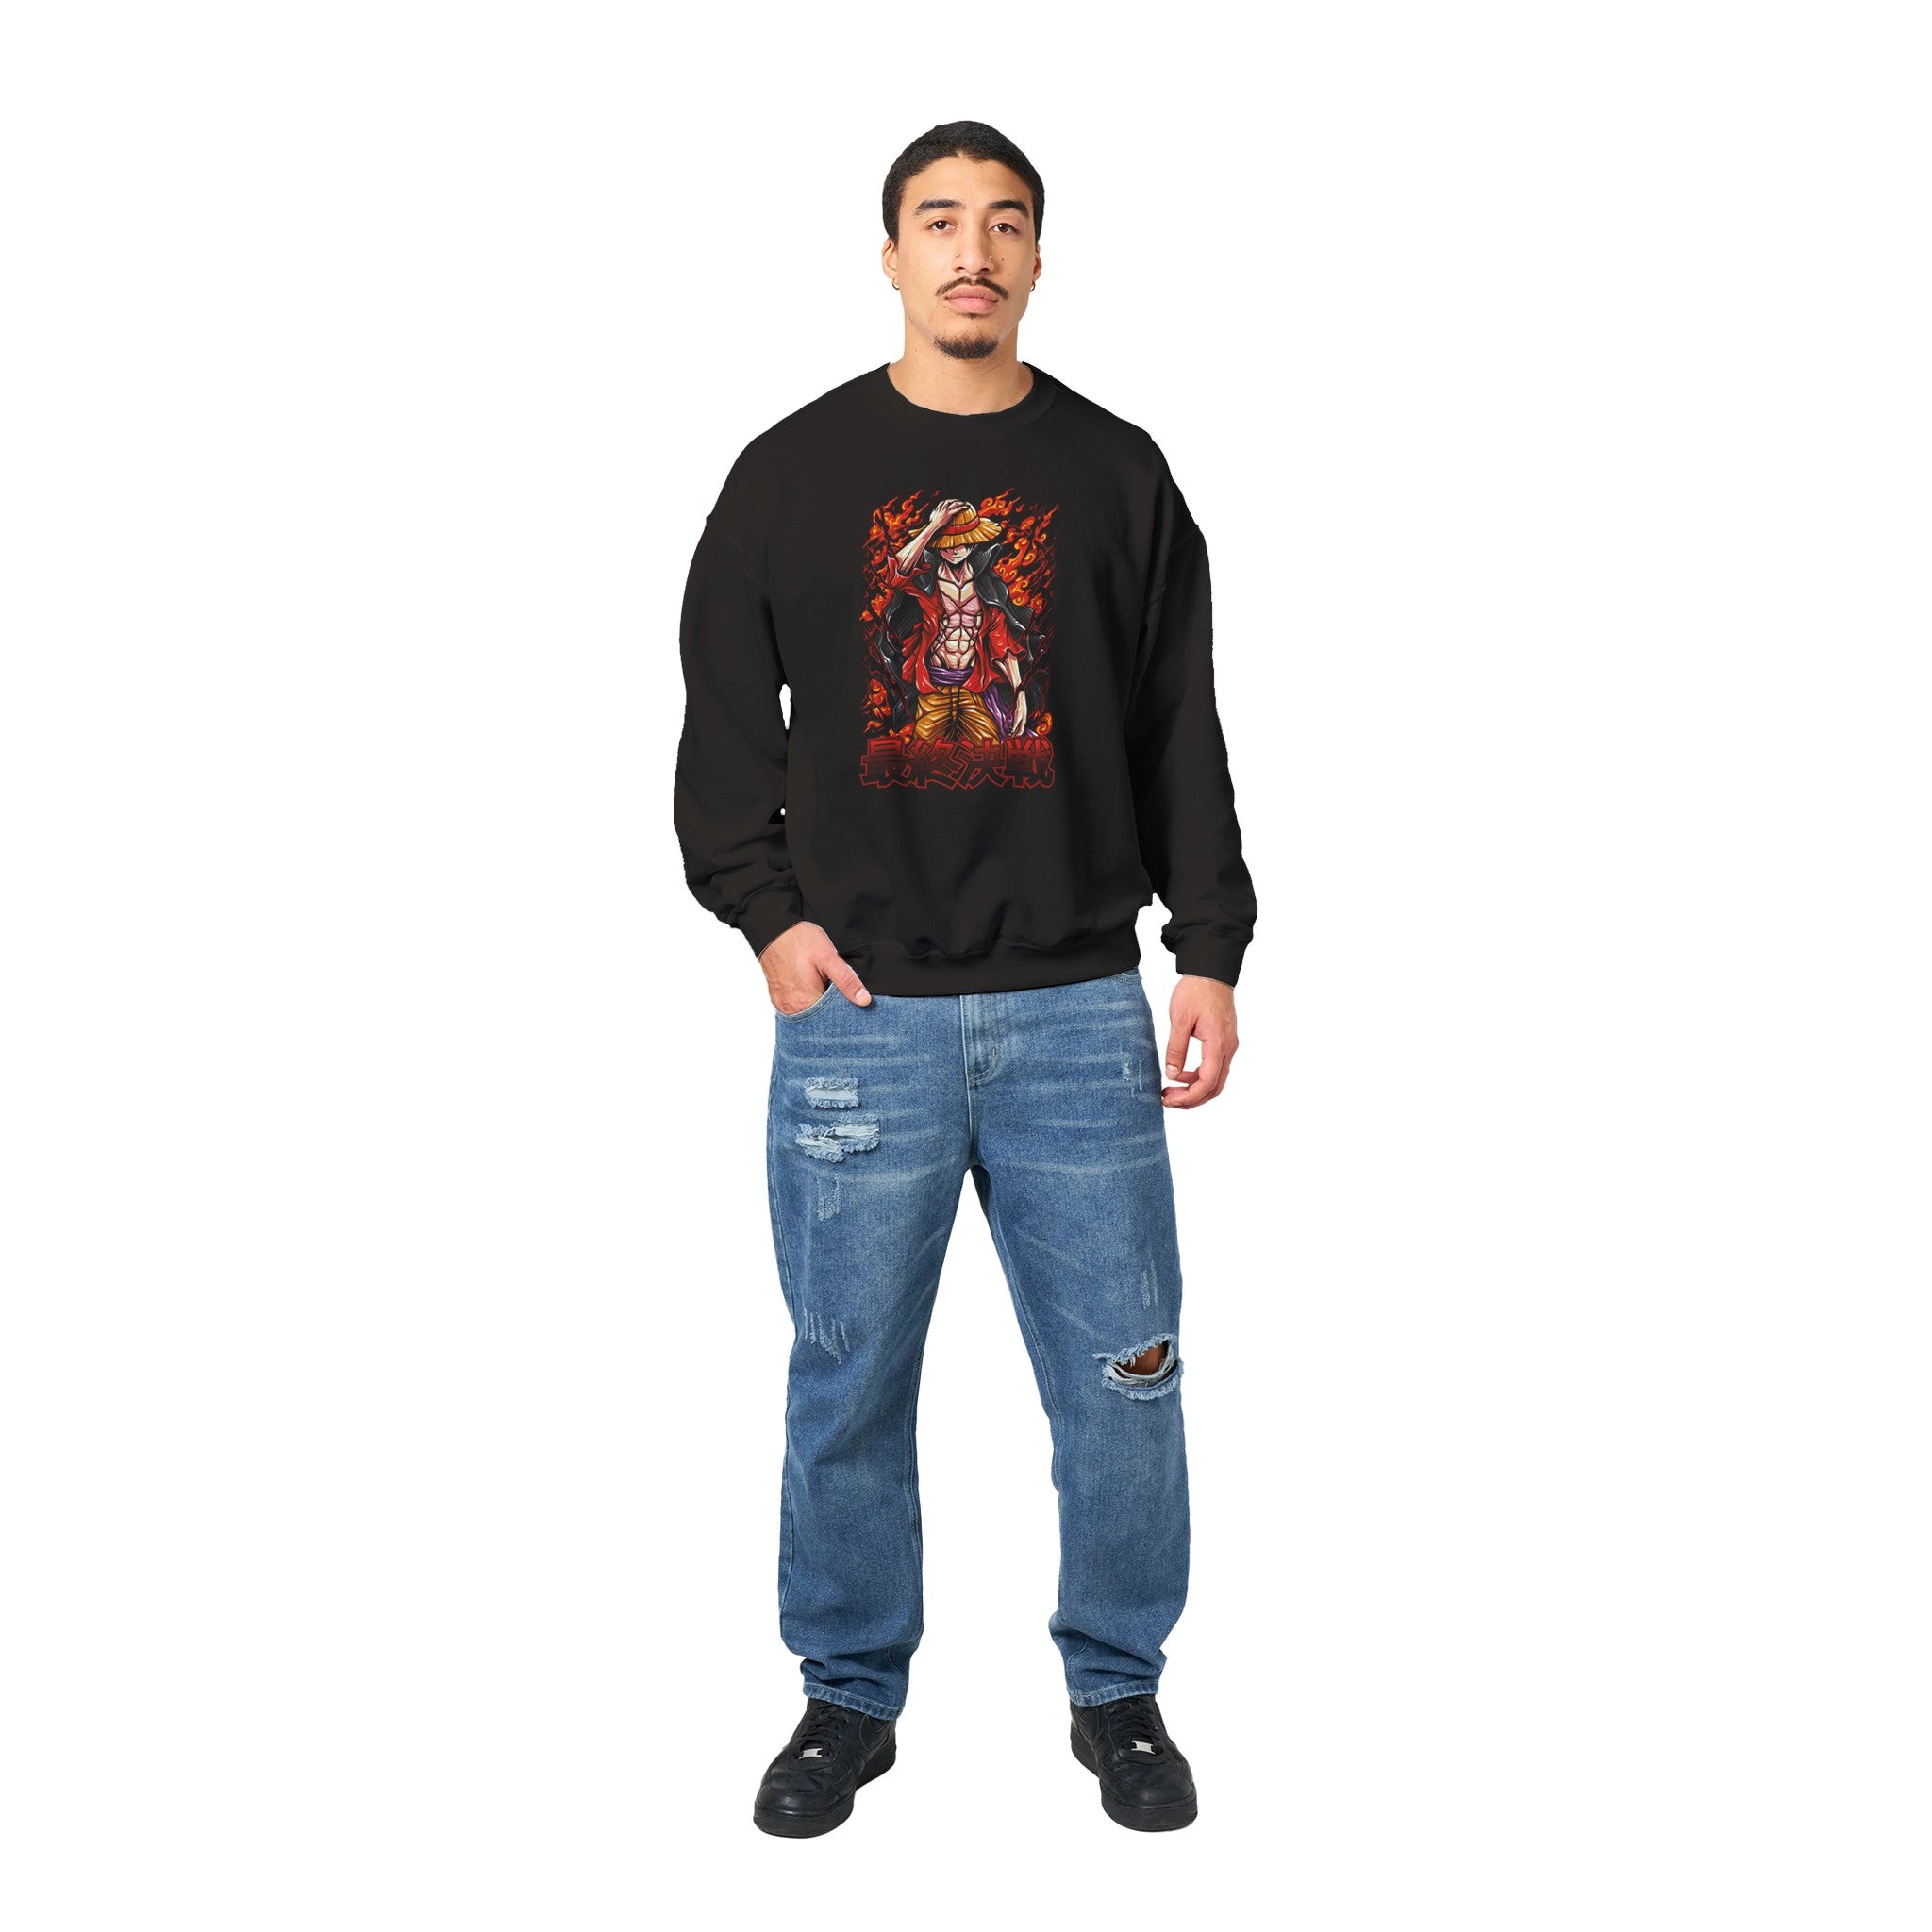 shop and buy one piece luffy anime clothing sweatshirt/jumper